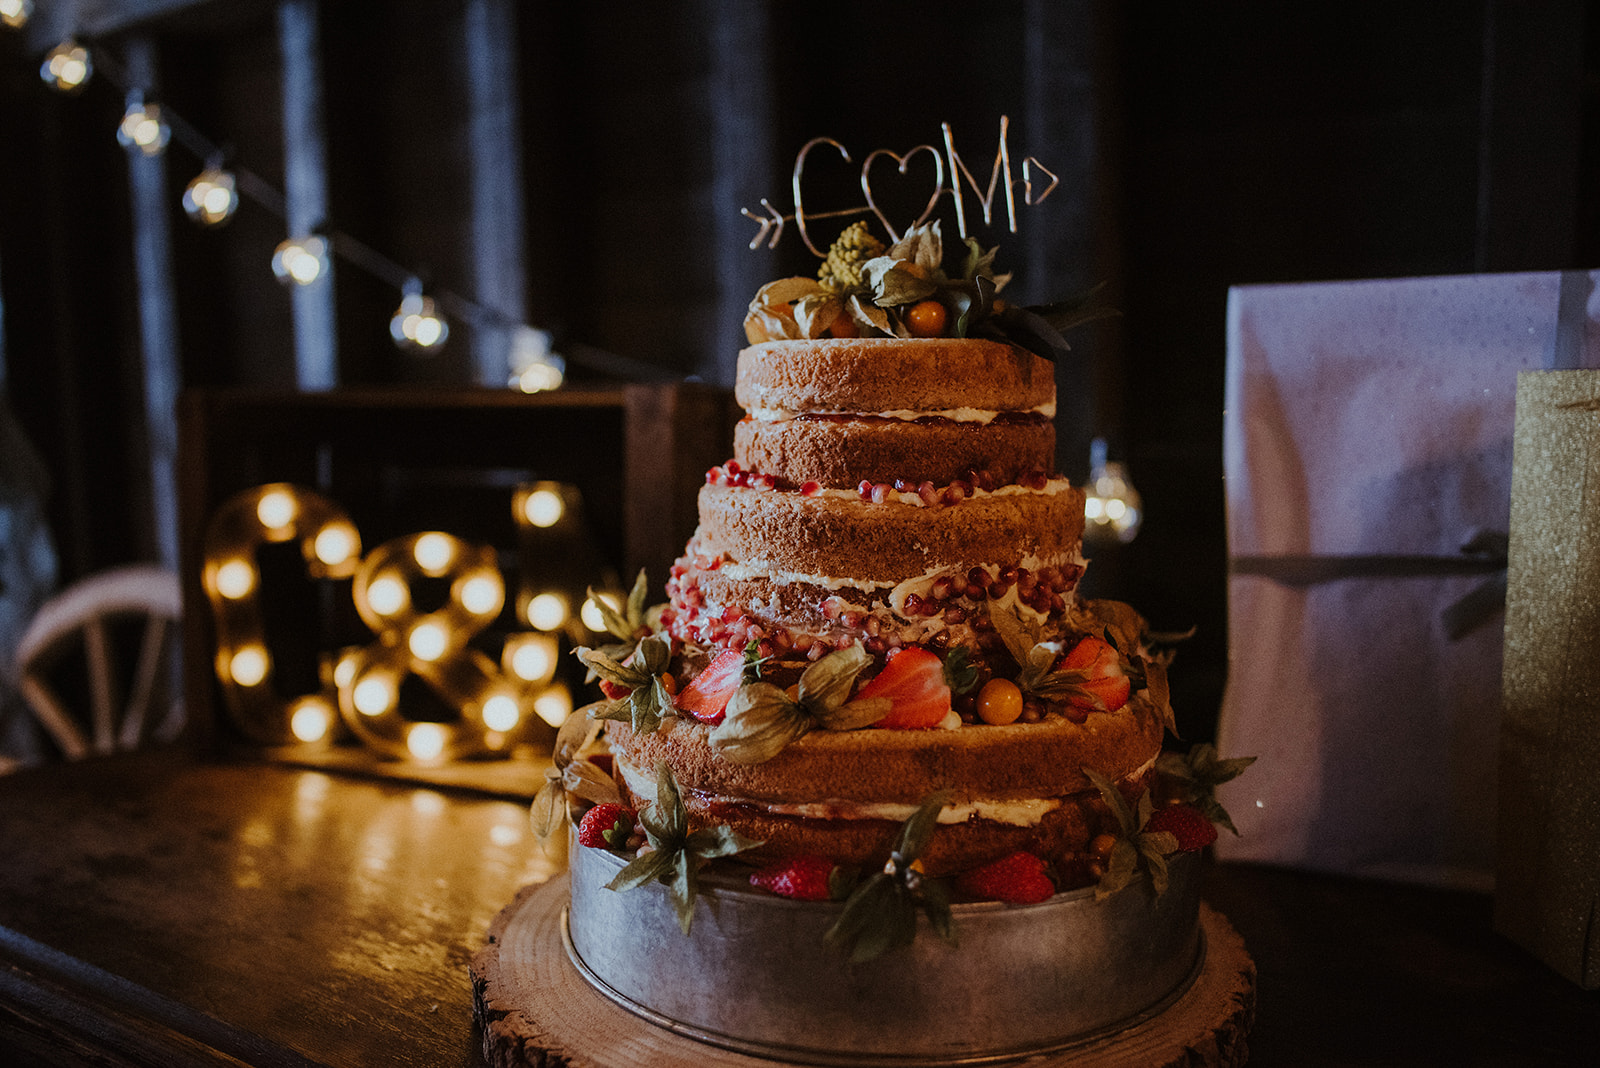 The wedding cake was a naked one decorated with fresh fruits and blooms